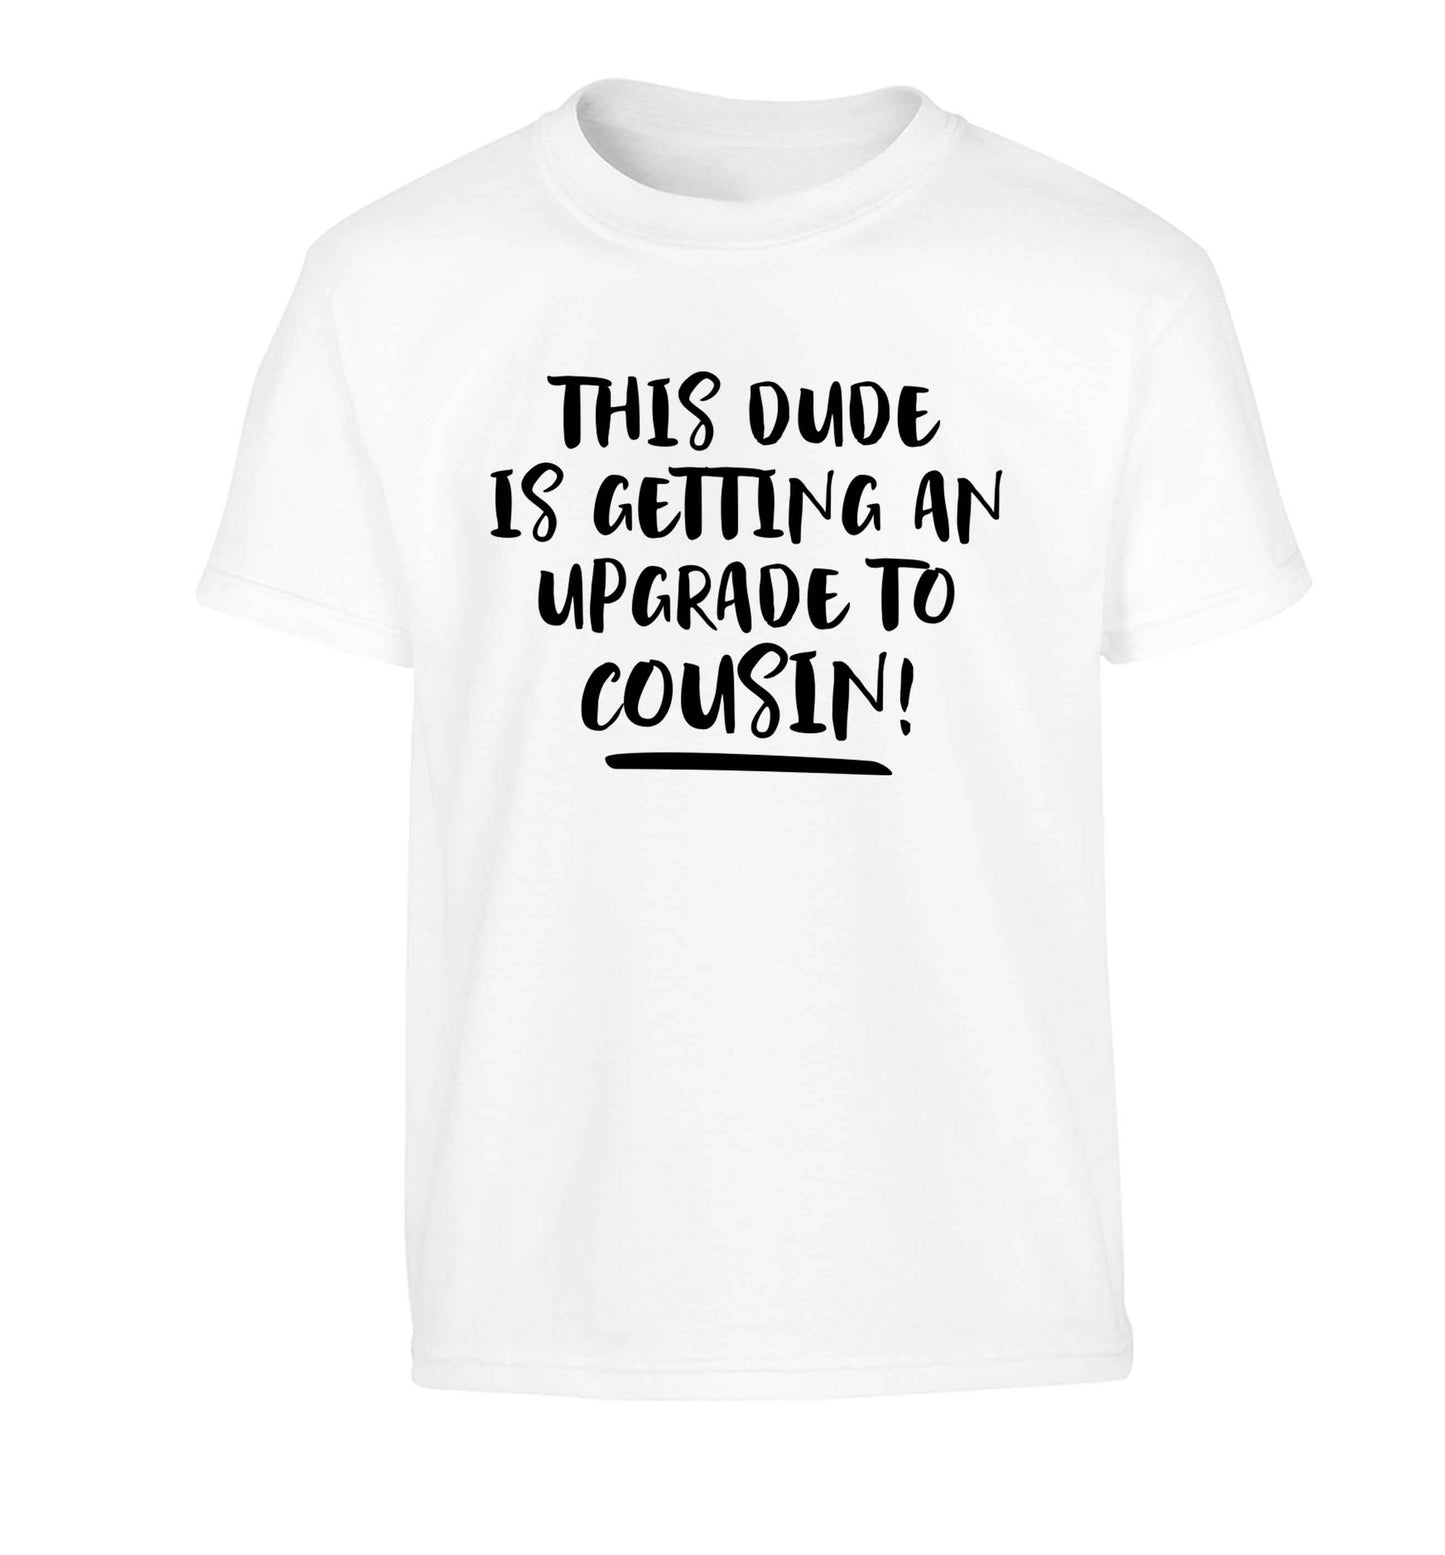 This dude is getting an upgrade to cousin! Children's white Tshirt 12-13 Years